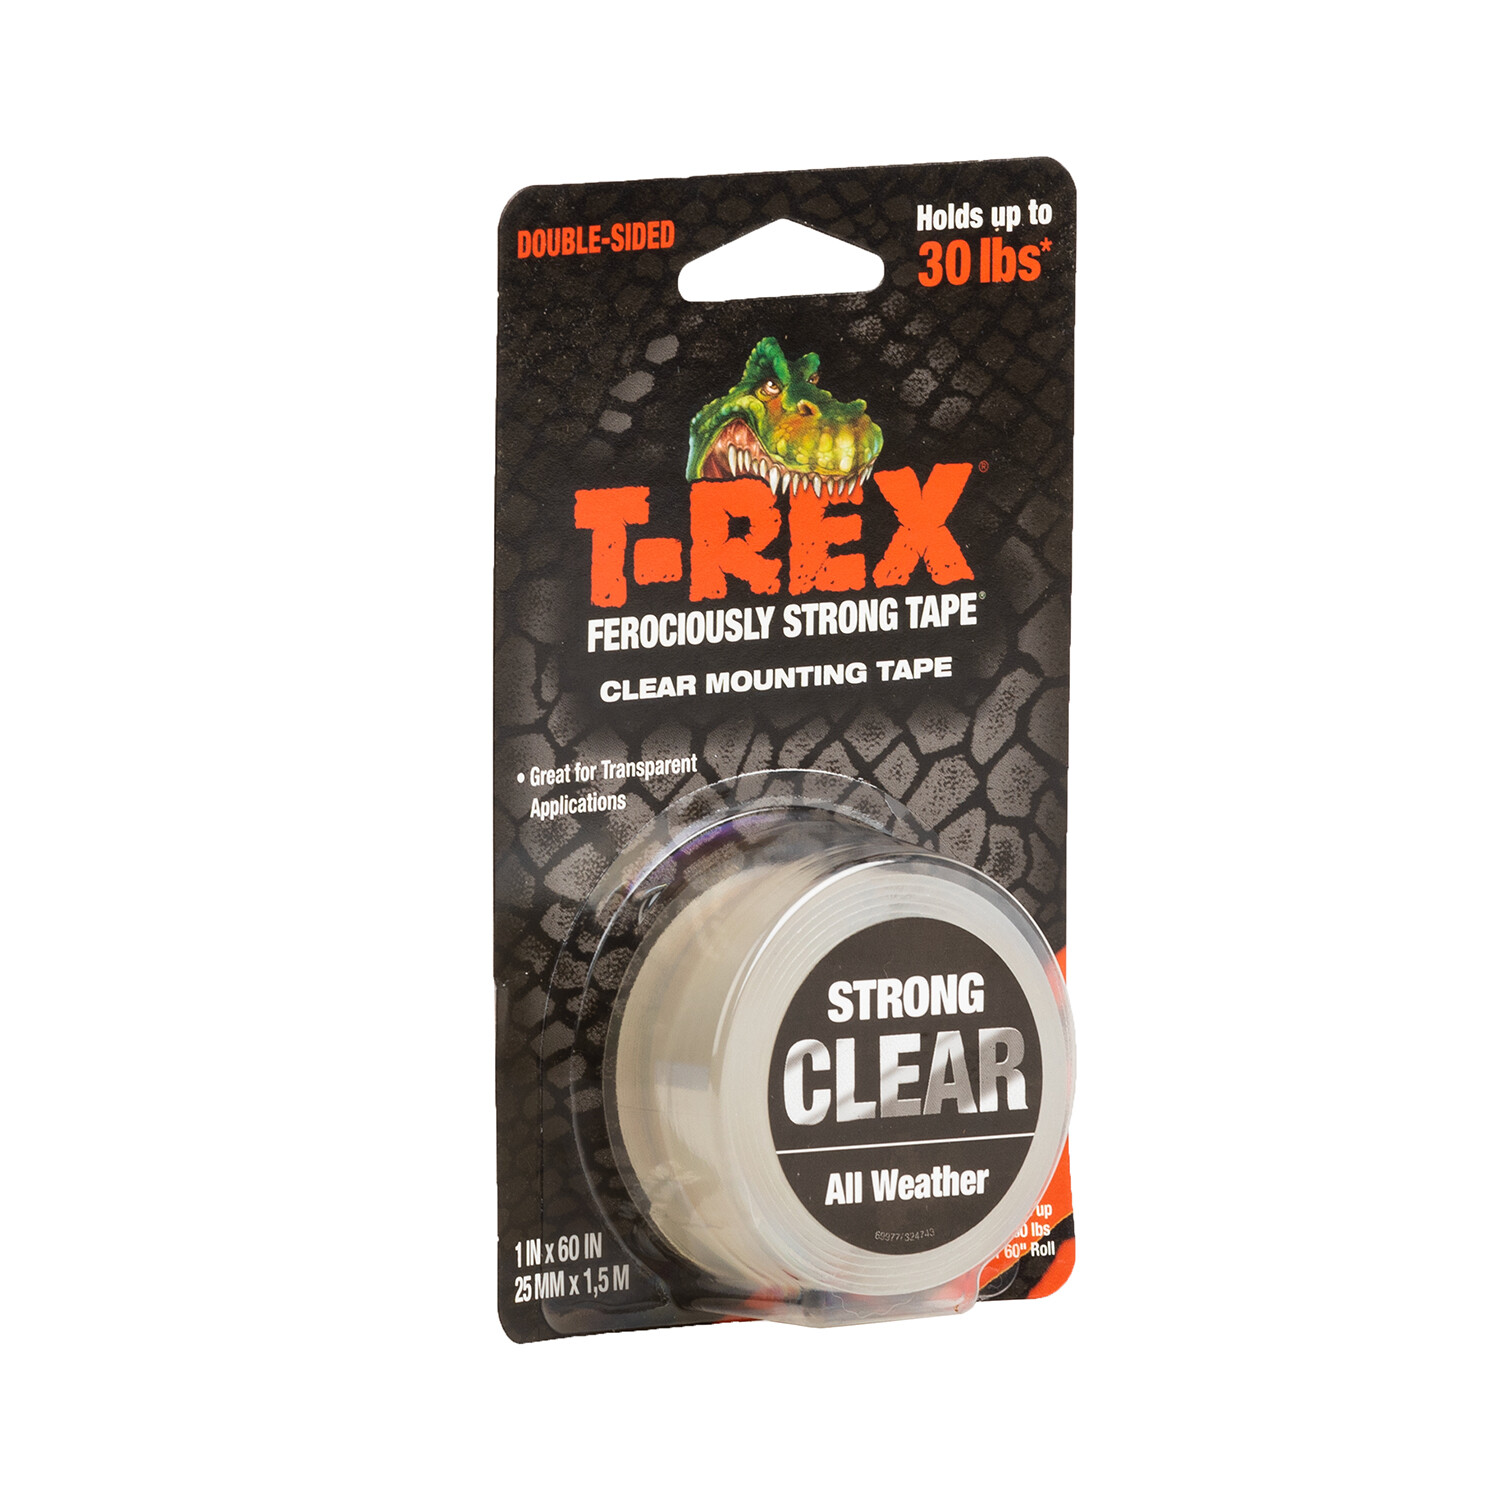 T Rex 25mm x 1.5m Clear Mounting Tape Image 2